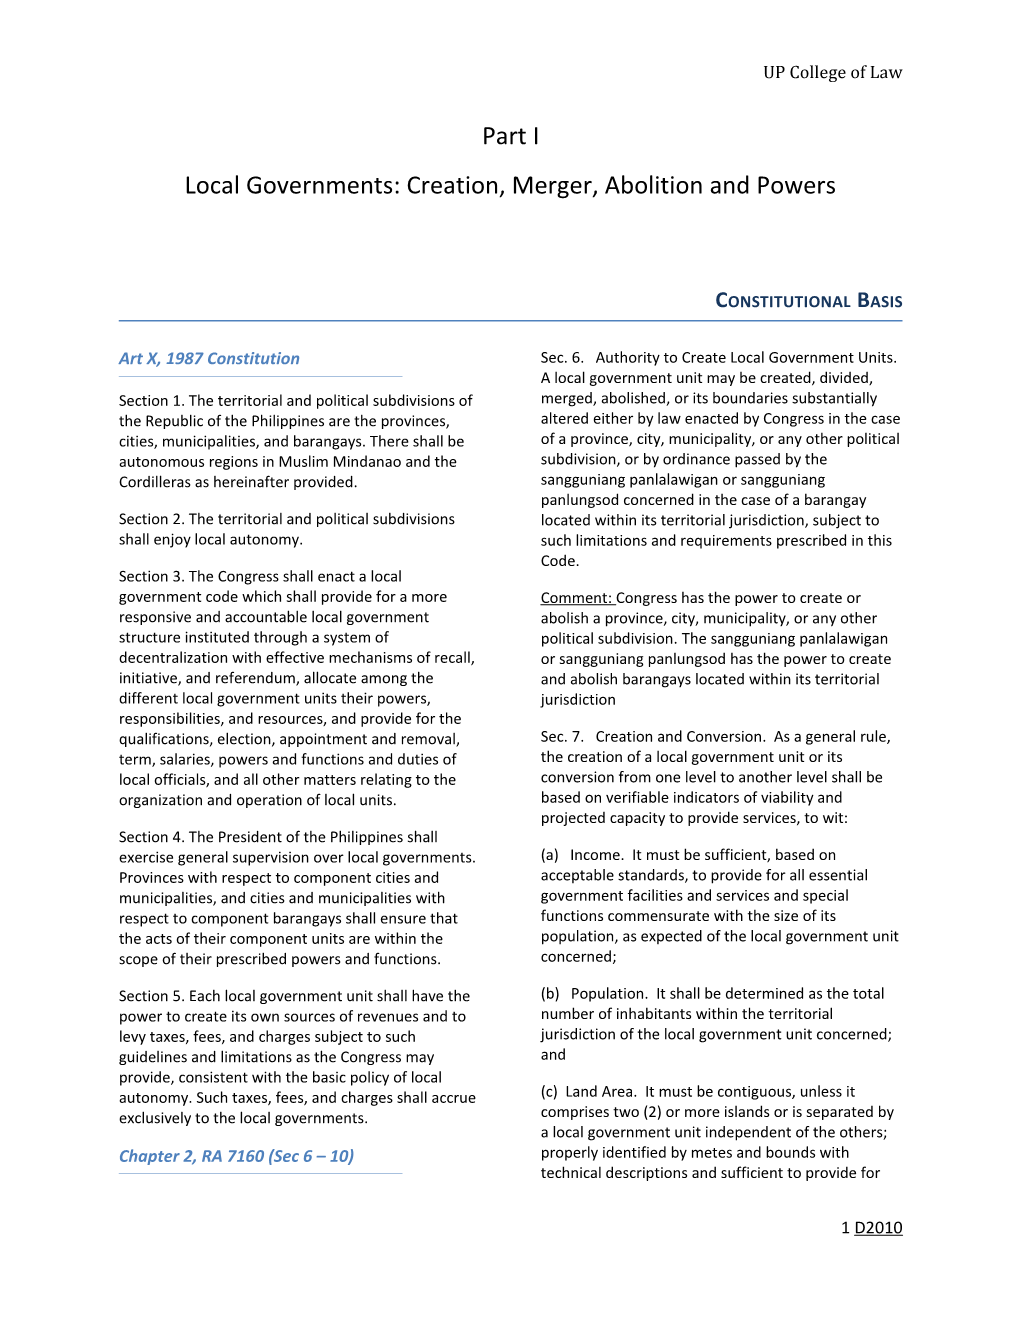 Local Governments: Creation, Merger, Abolition and Powers